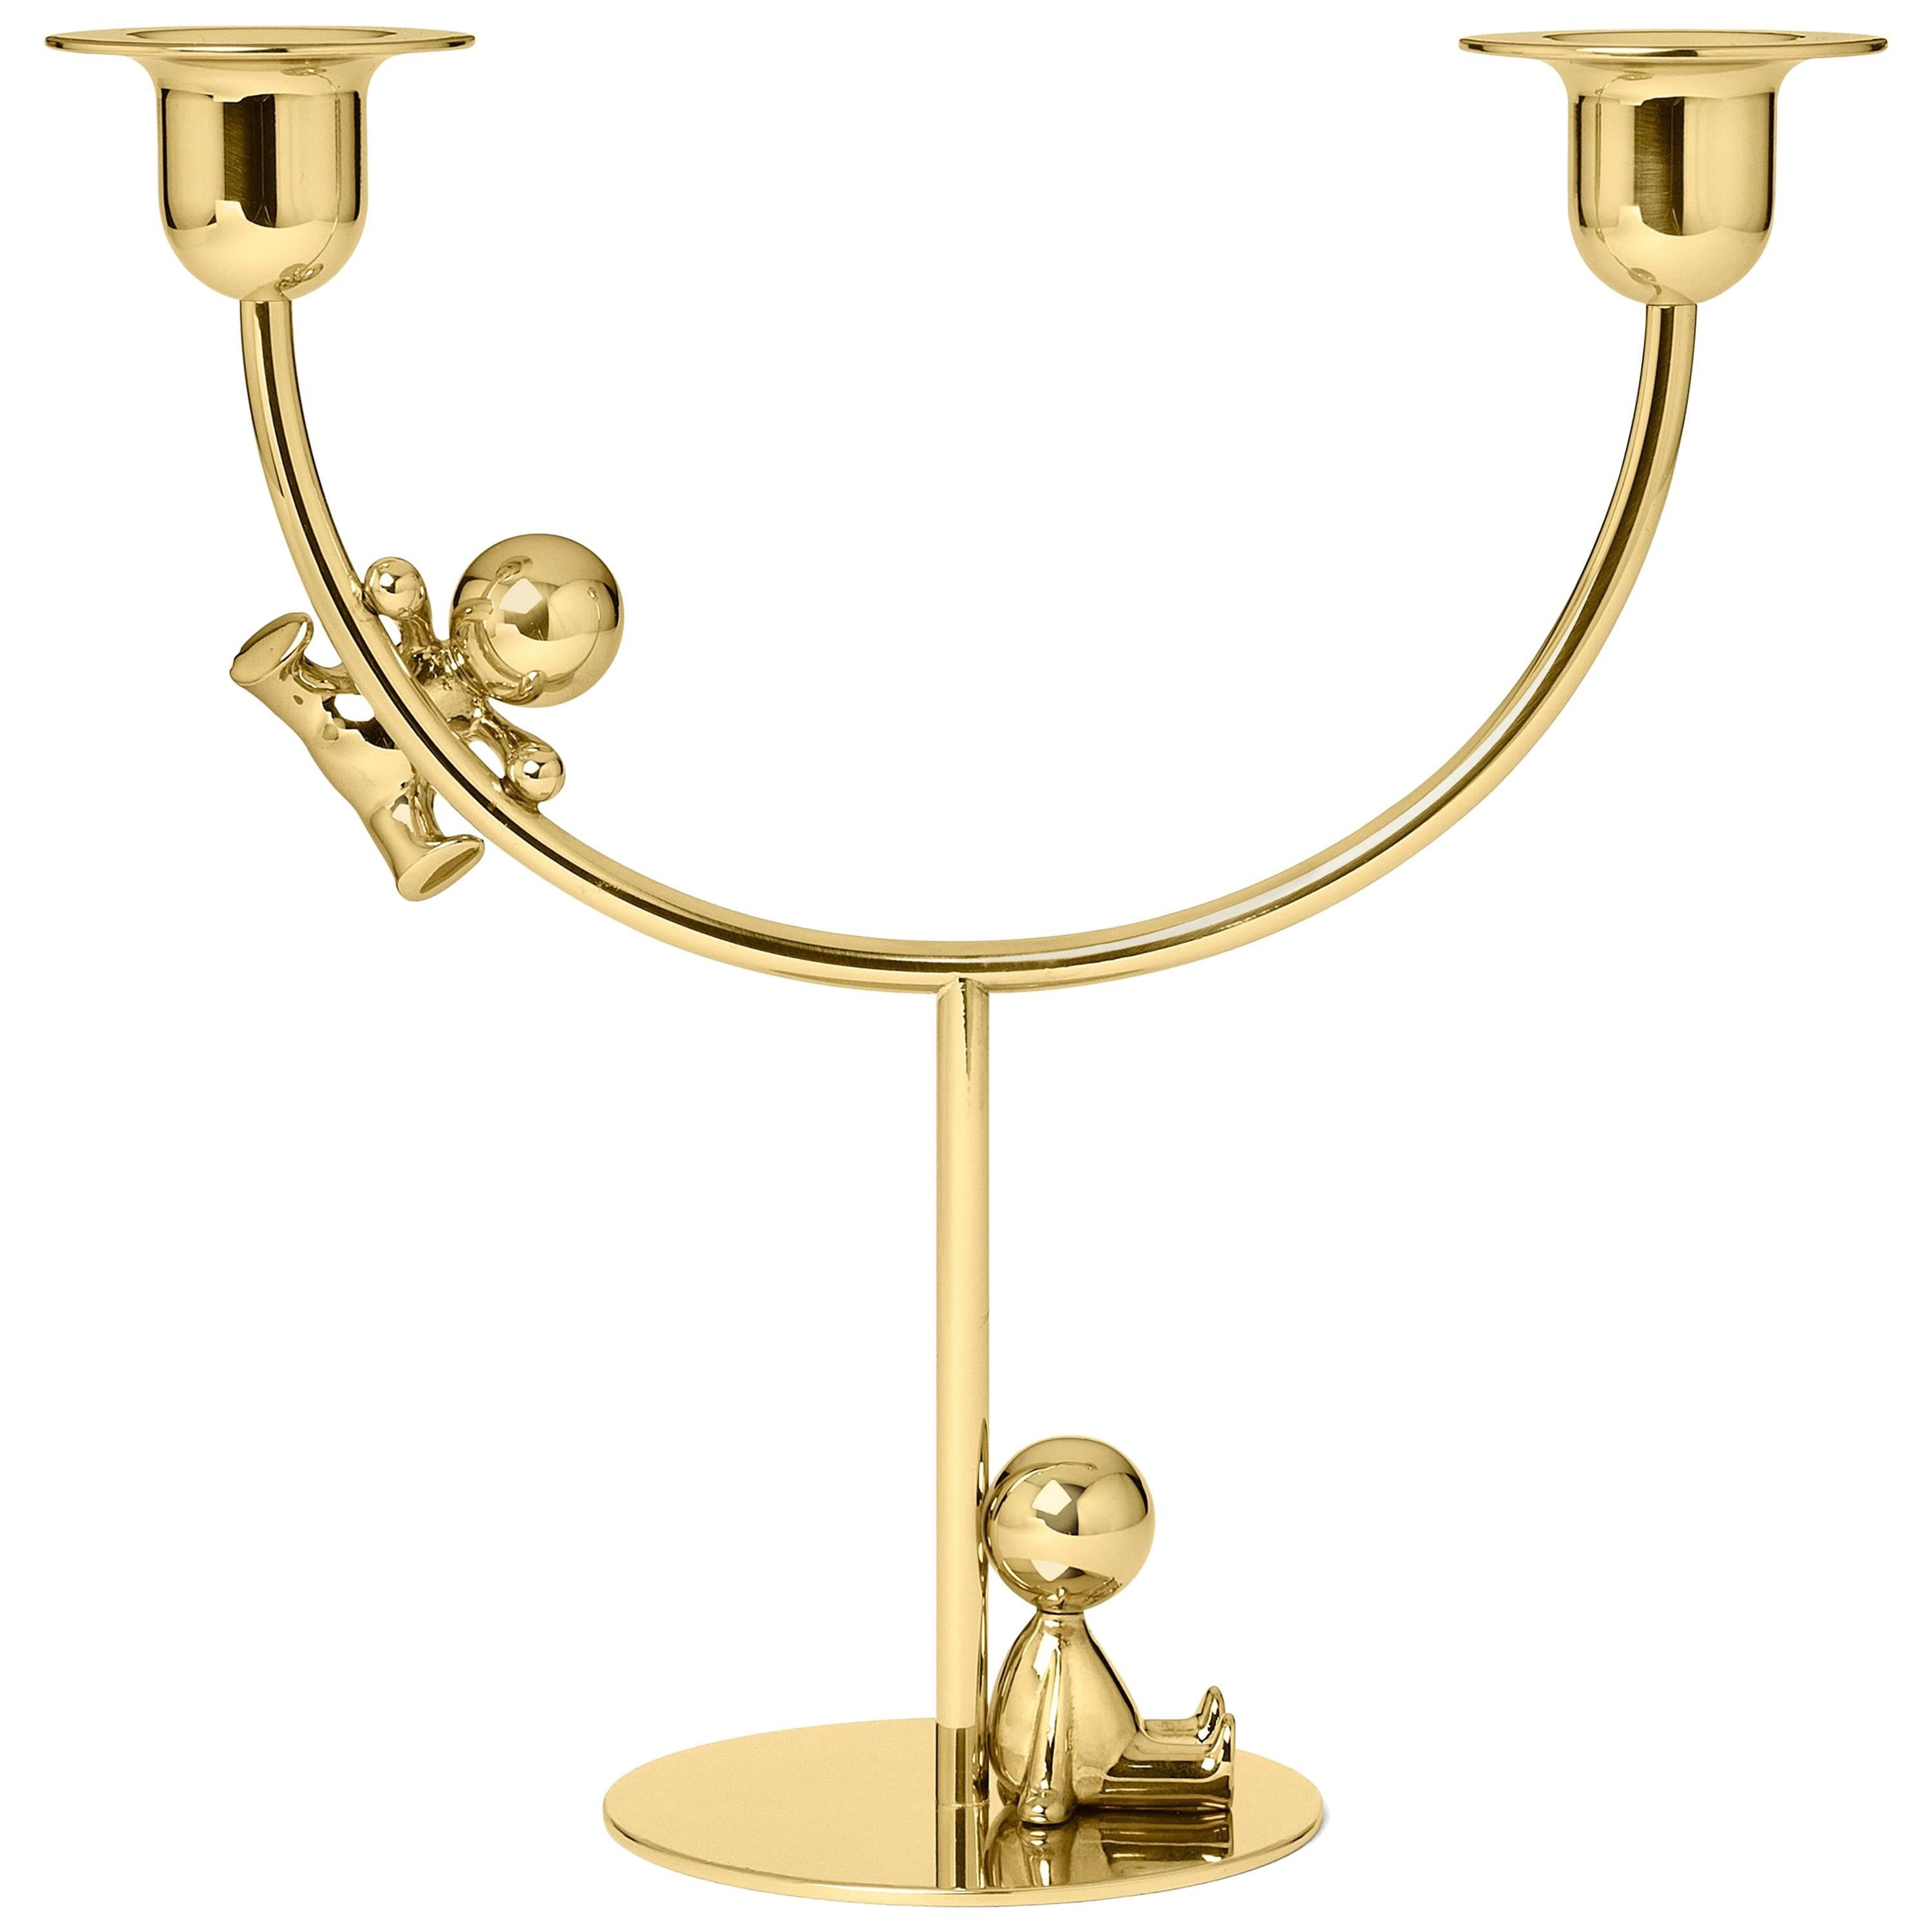 Ghidini 1961 Omini the Lazy Climber Candlestick in Polished Brass For Sale